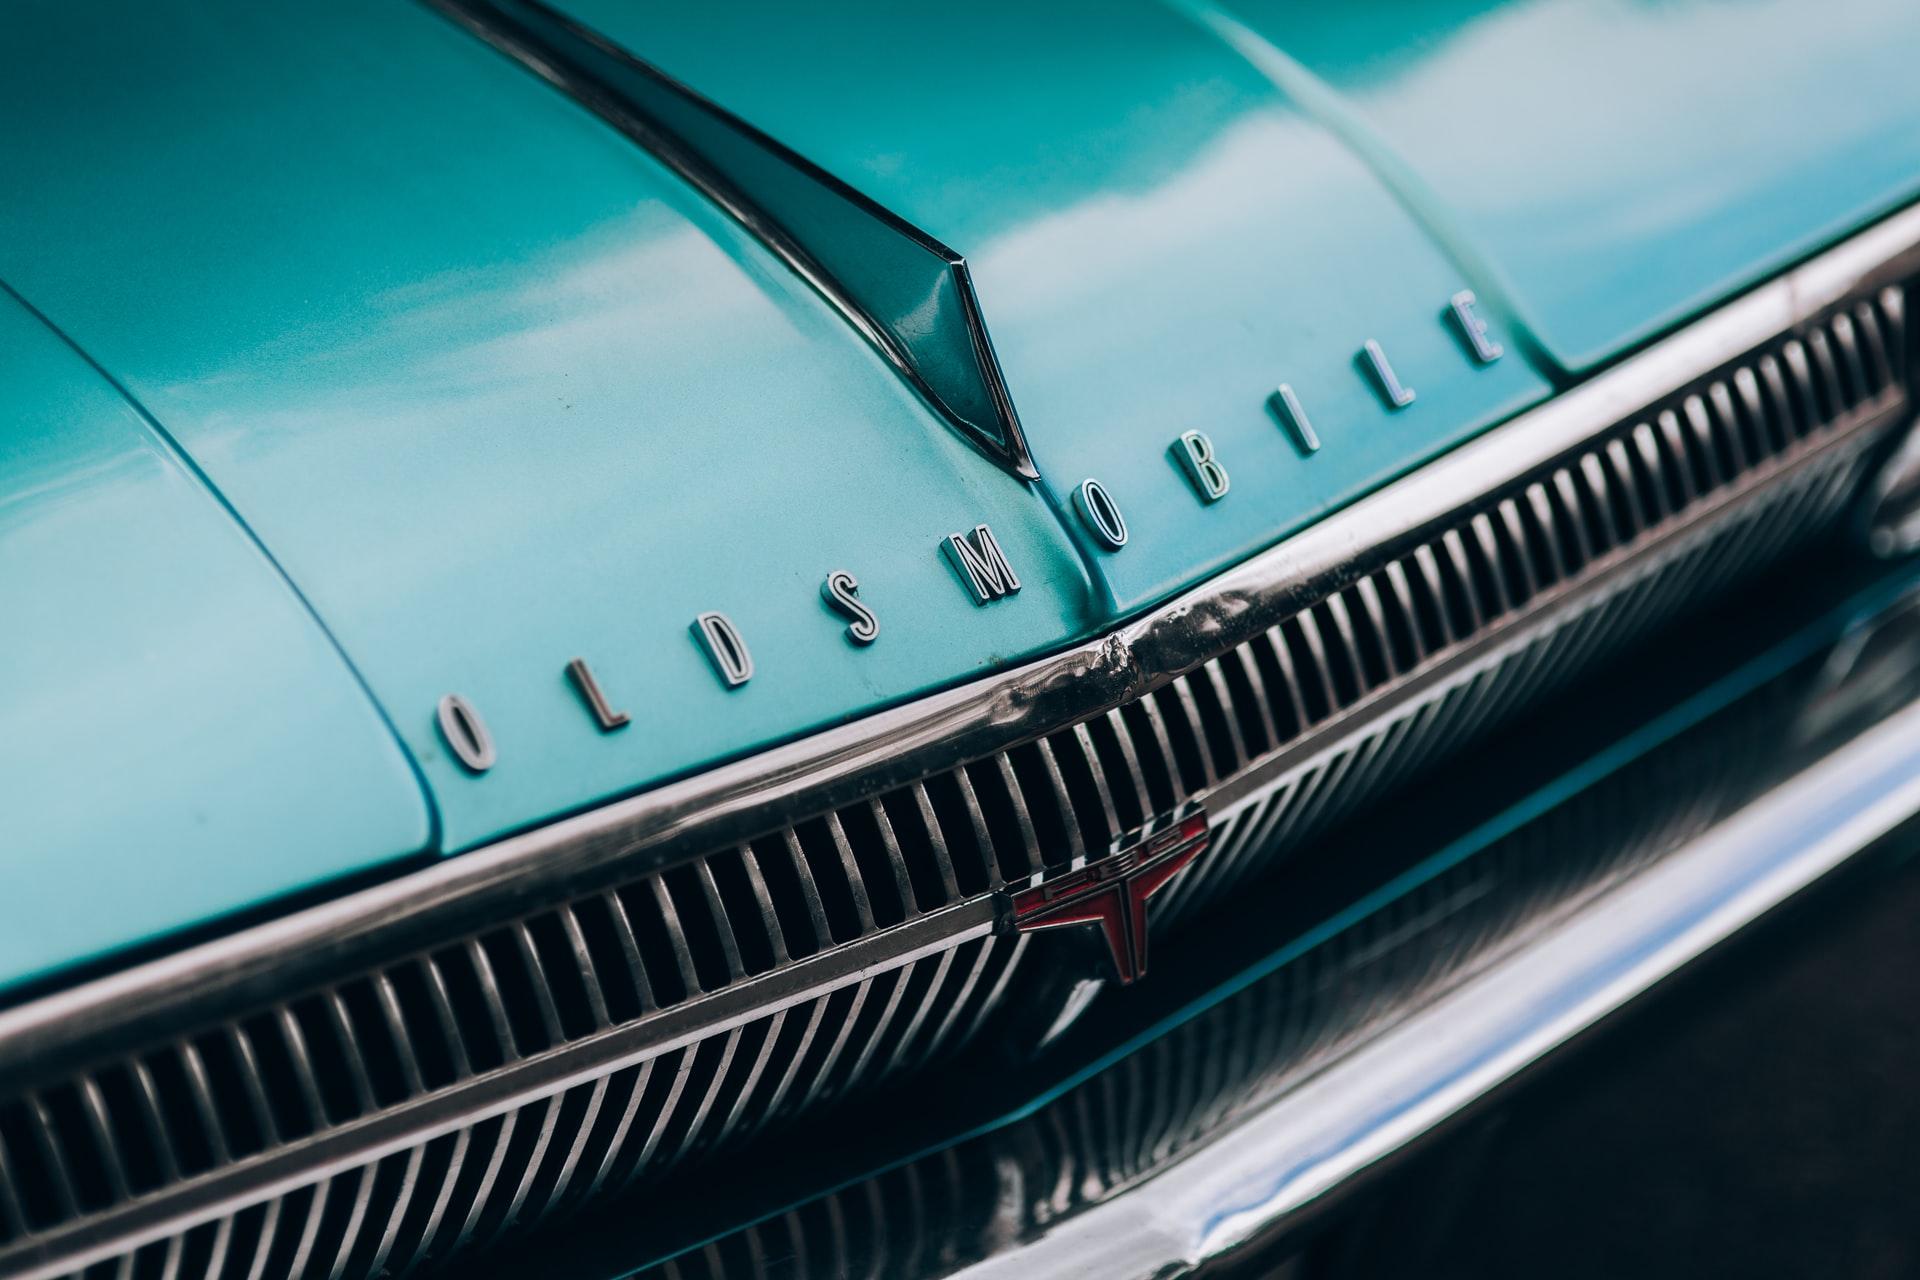 Oldsmobile is well-known among classic car enthusiasts.